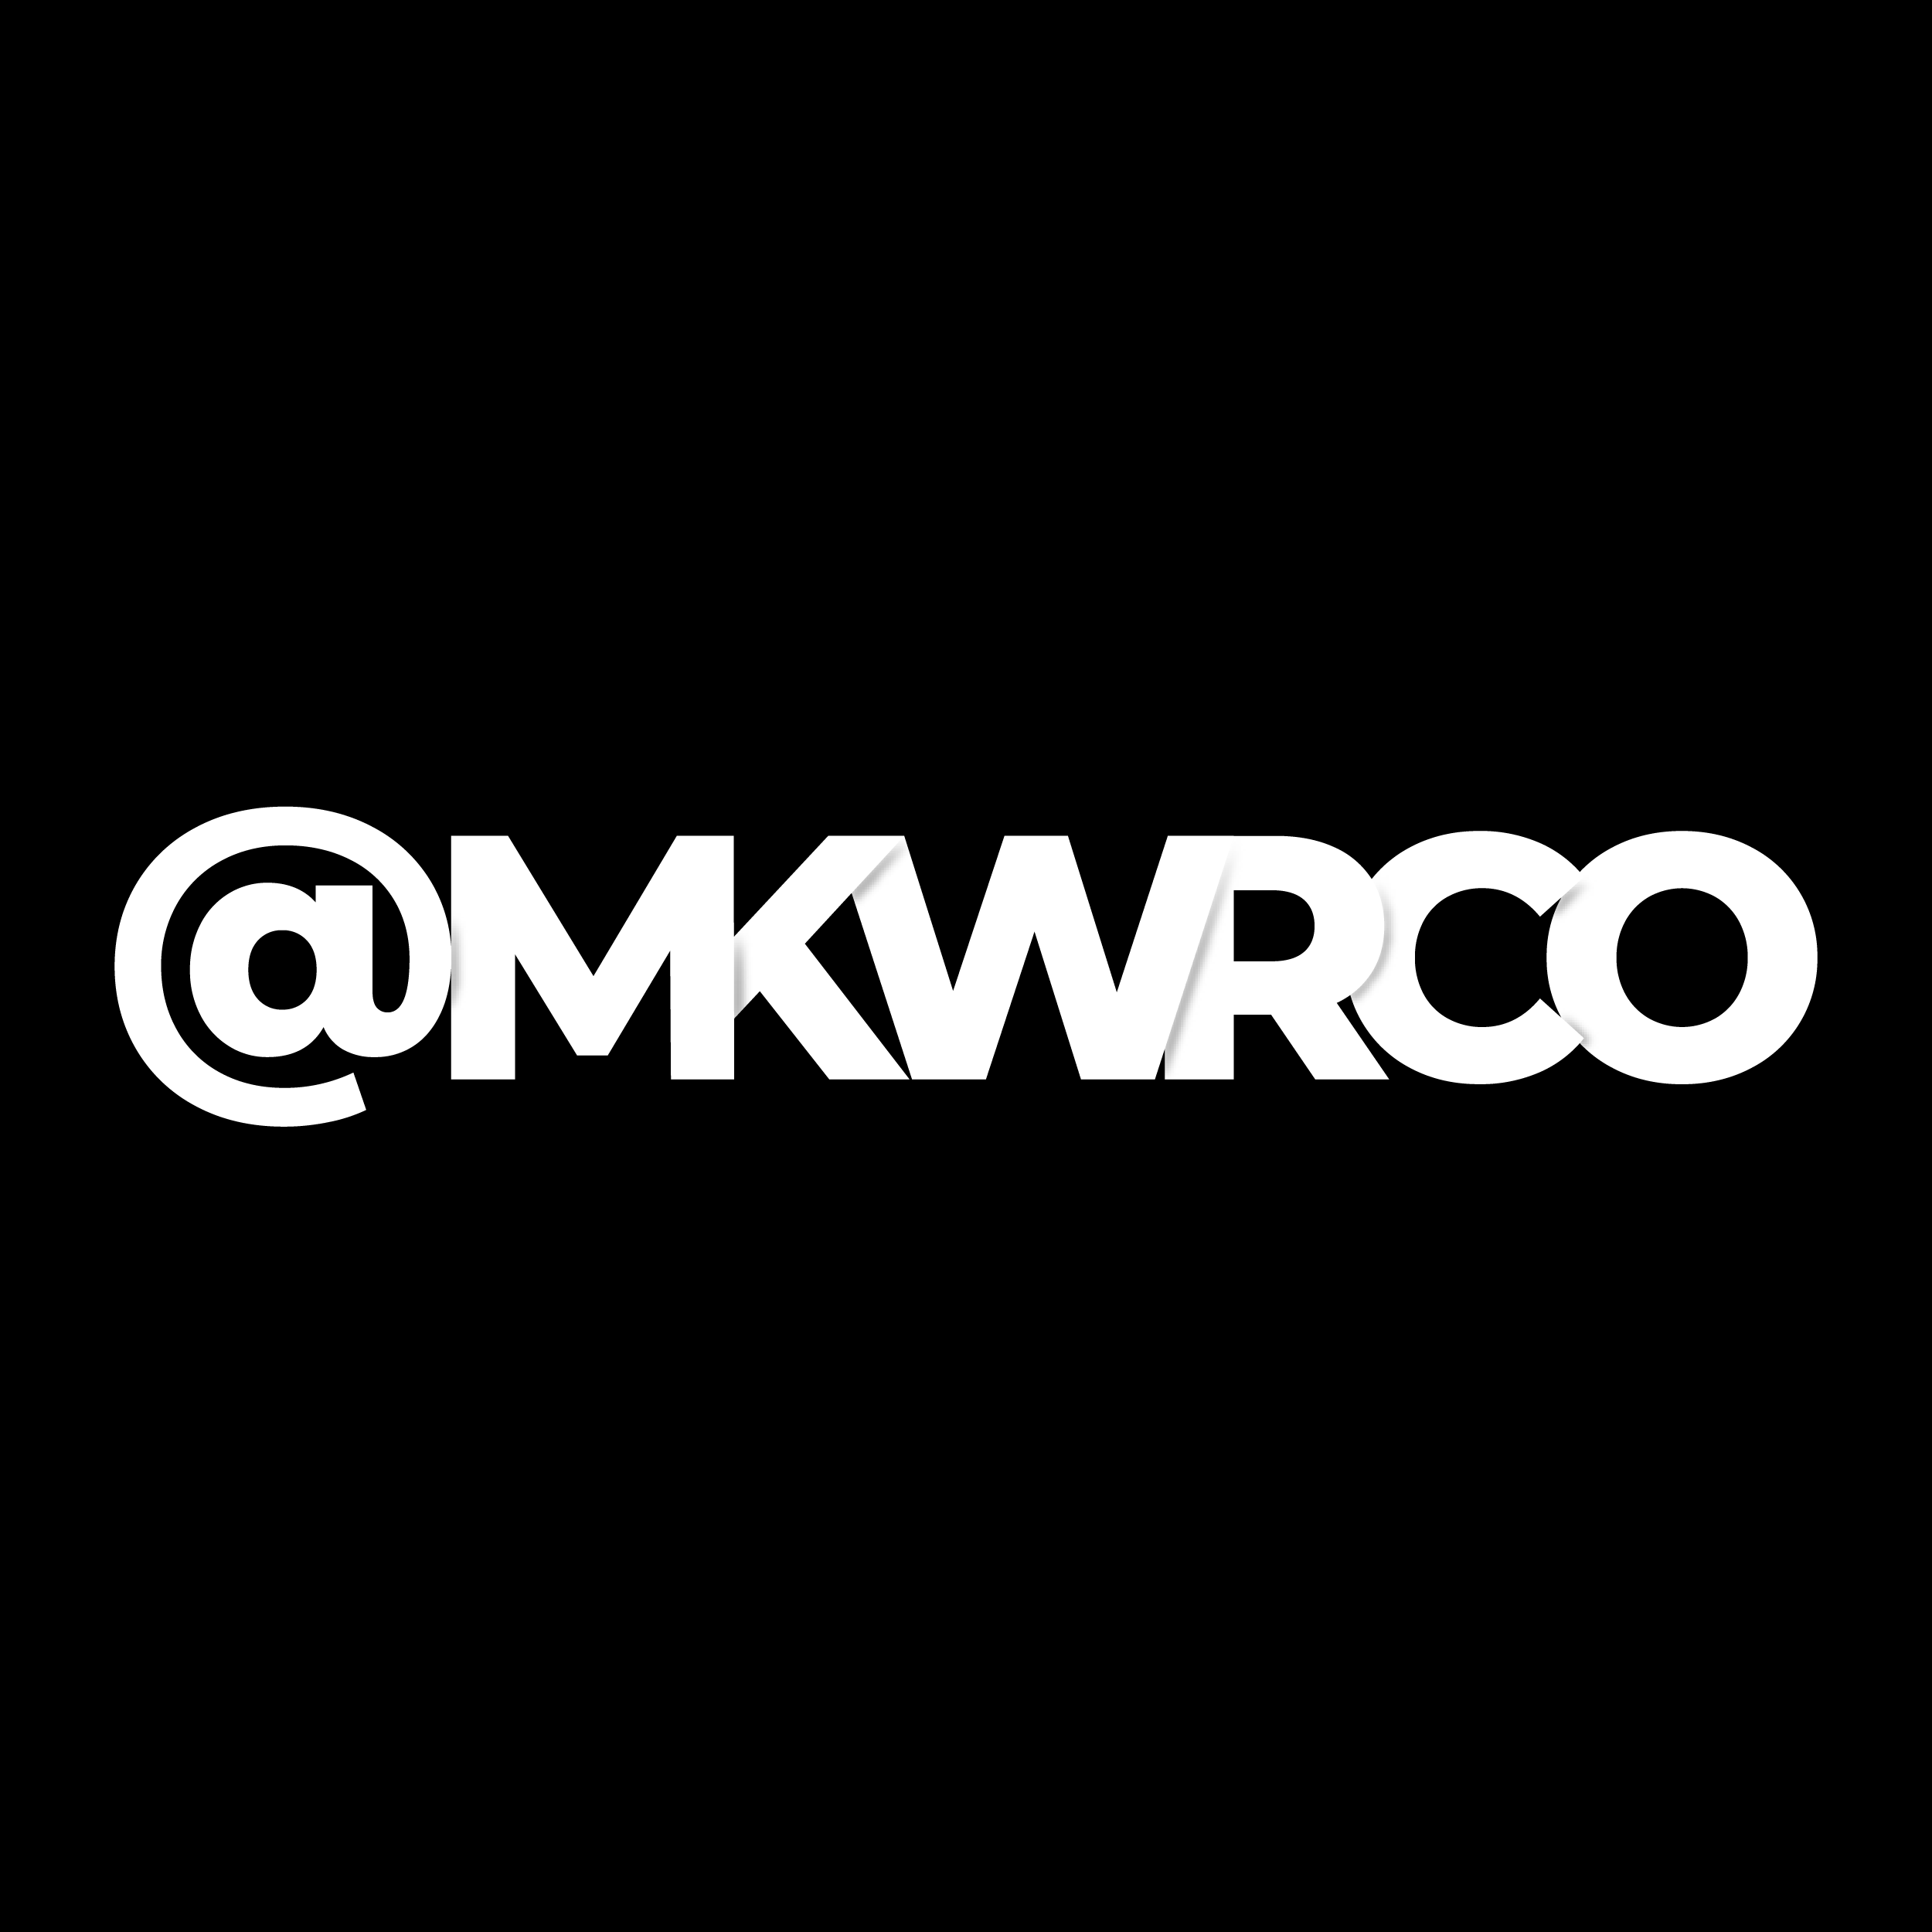 @mkwrco logo by Michael P Wright for mikewriting.com